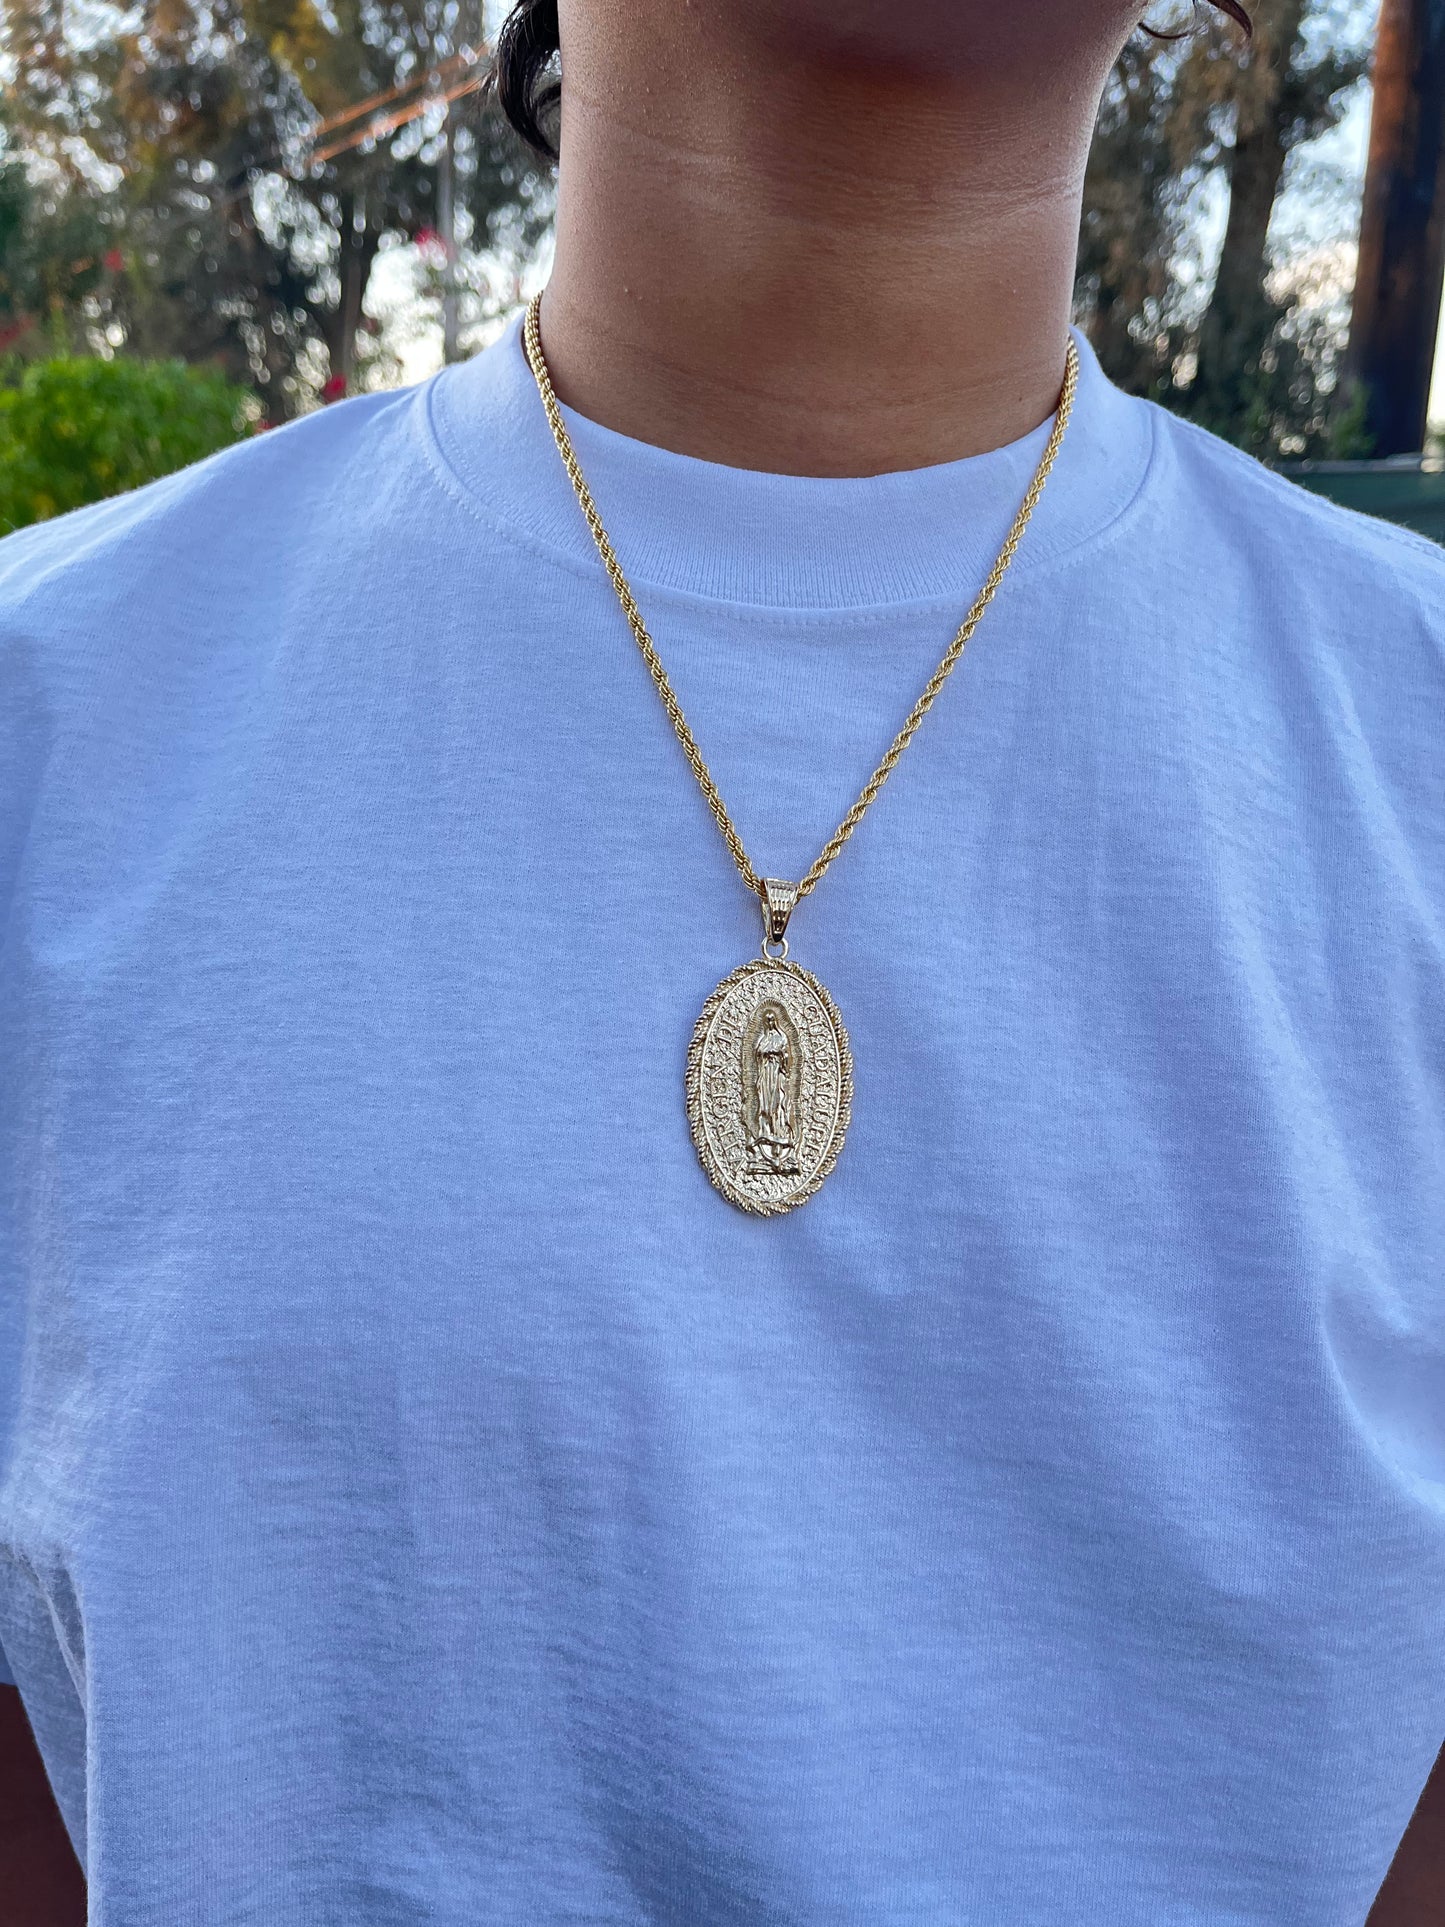 Double Sided San Judas Tadeo/Virgen De Guadalupe Chain